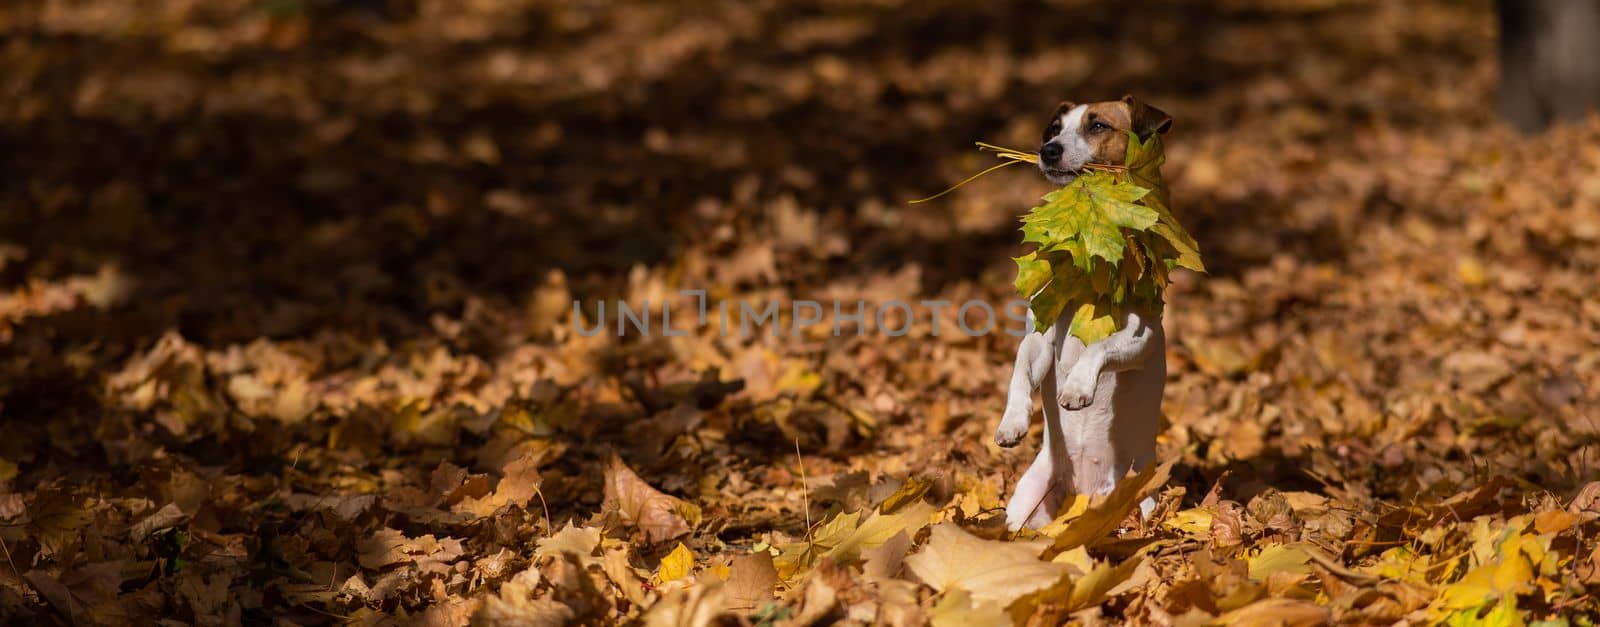 Jack Russell Terrier dog holding a yellow maple leaf on a walk in the autumn park